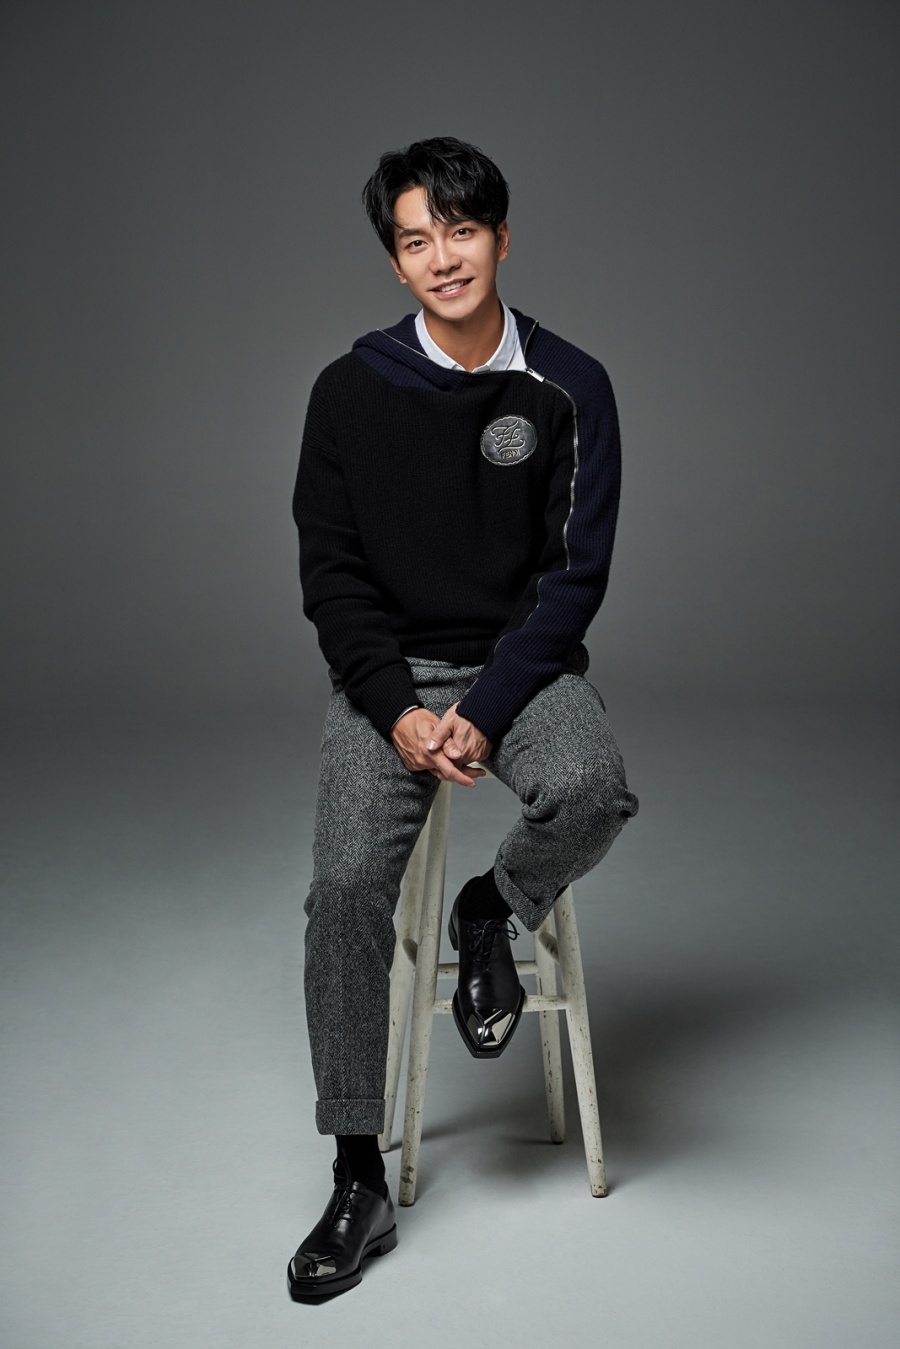 Actor Lee Seung-gi mentioned the possibility of Vagabond season 2.Lee Seung-gi, in a recent interview, said, It is an ending that I have to wait for Season 2.The SBS gilt drama Vagabond (playplayed by Jang Young-chul and Jeong Kyung-soon, directed by Yoo In-sik) ended with an open ending that hinted at Season 2.Lee Seung-gi, who was in danger of dying due to the ruse of Prince Edward Island Park (Lee Kyung-young), managed to survive and become a mercenary, and Ko Hae-ri (Bae Su-ji) was reborn as a lobbyist with the help of Jessica Lee (Moon Jung-hee).The fateful story of two people going to revenge day for Sammael Prince Edward Island Park, the axis of evil in their respective seats, inspired expectations for season 2.Its going to be frustrating for viewers to see the ending, the end thats bound to wait for season two, Lee Seung-gi said.Although I did not share the story about Season 2 with Yoo In-sik PD, I had a sympathy for Season 2 production.In fact, Vagabond was a project that started with Season 2 production in mind.Lee Seung-gi said, There were stories I wanted to do a little more while shooting Vagabond.If the season 1 is good and the viewers really want to do it by season 2, I talked about what I wanted to say. In order to be real, the production company has to move.There will be a lot of difficult situations until Season 2 is actually done. Lee Seung-gi said, If coach (Yoo In-sik) really does season 2, he will be happy. If you receive season 2 proposal, I am willing to enjoy it. He also said that if Vagabond season 2 is produced, I will be willing to join together.In Vagabond, Lee Seung-gi won the acclaim of viewers by playing the role of Cha Dal-gun, who lost his nephew in a hot stuntman and lived a life of a pursuer.=